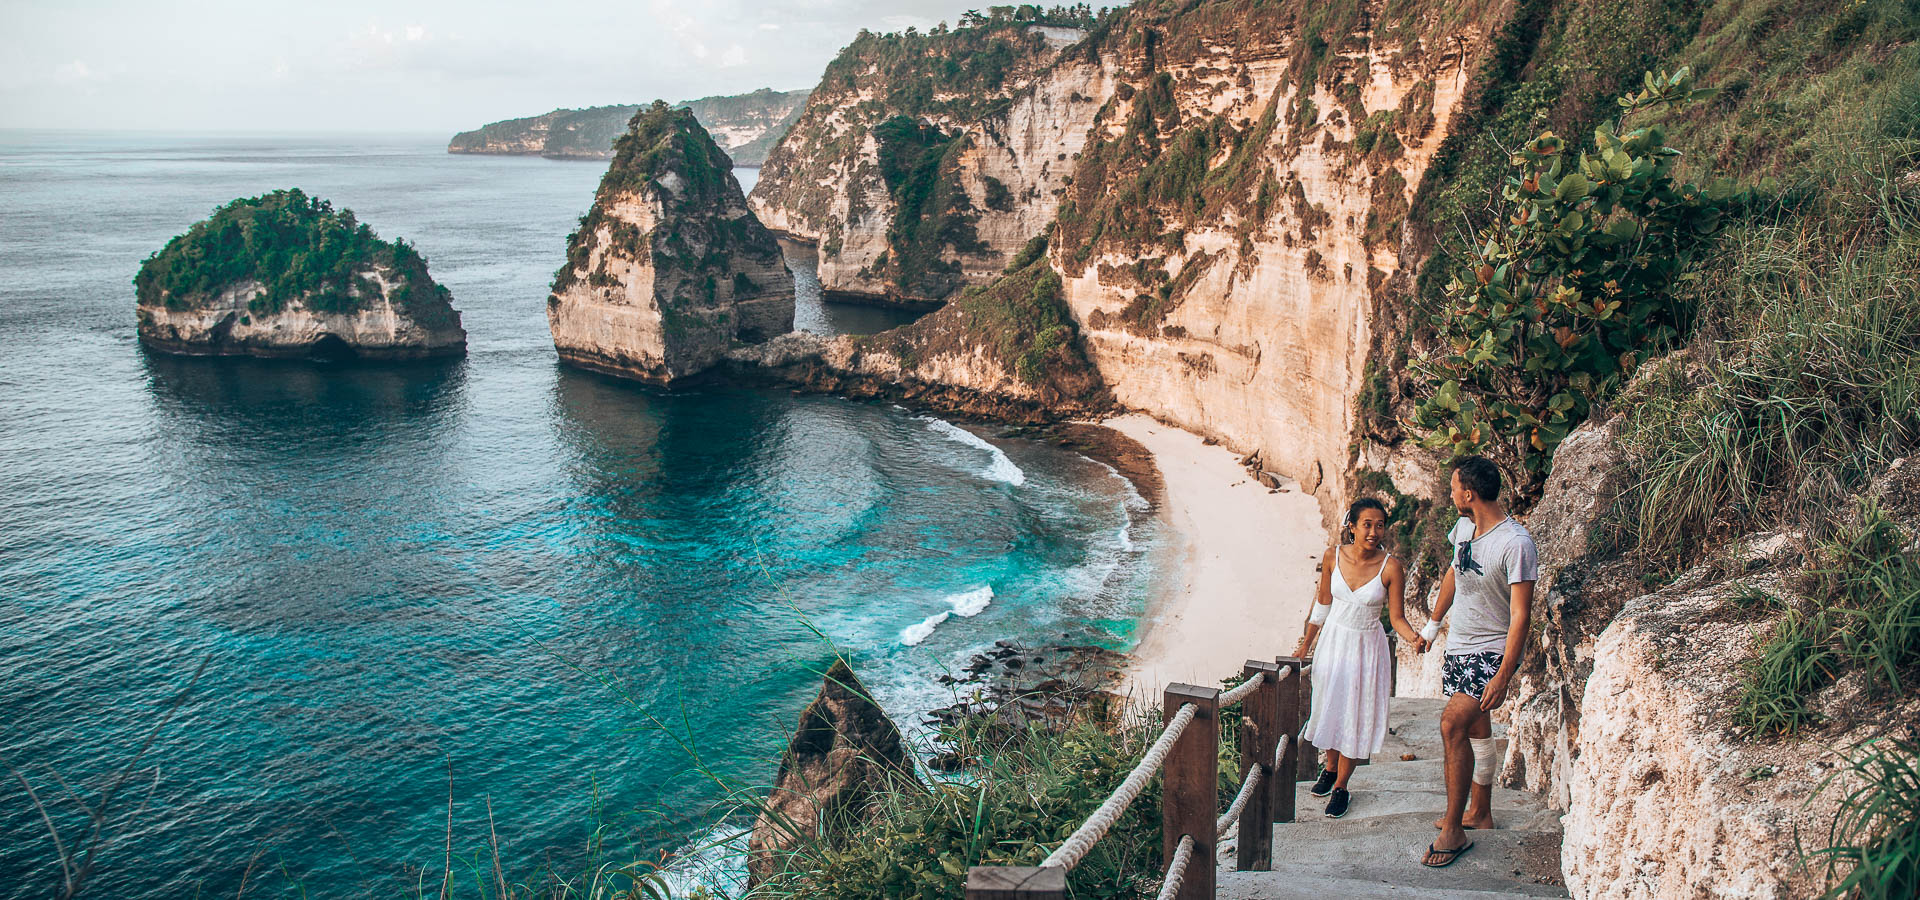 Why You Should Not Rent A Scooter In Nusa Penida | 5